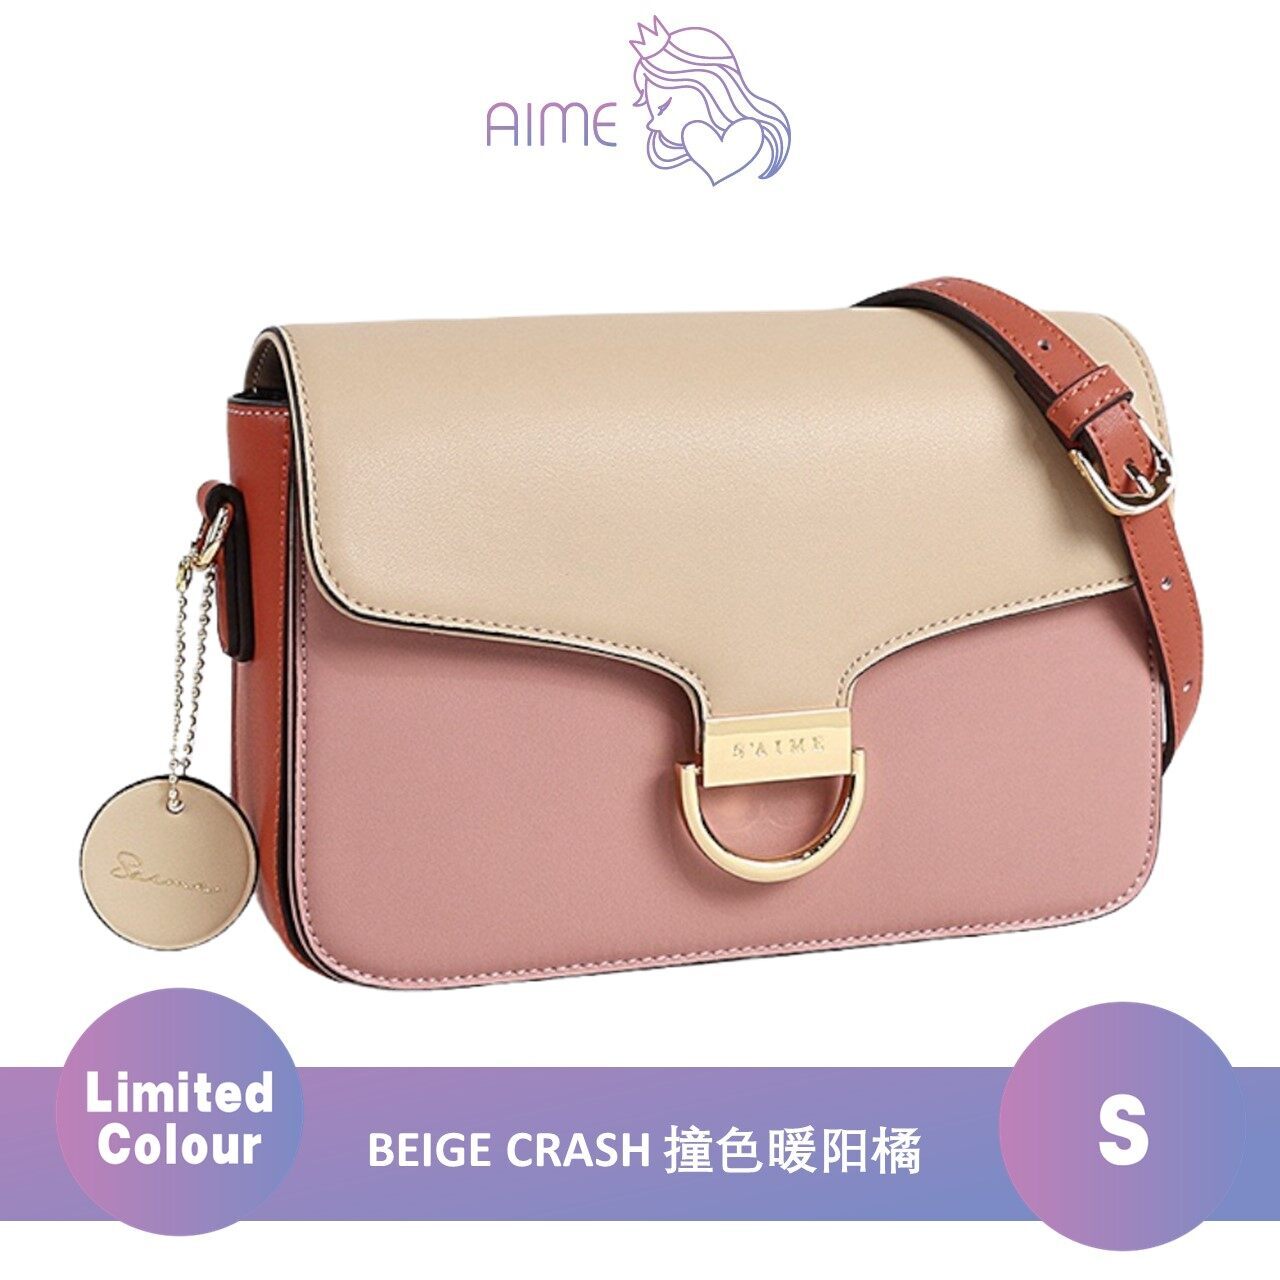 S'AIME | Authentic Leather COCO Oblong Bag 真皮COCO多隔层小方包 (S)